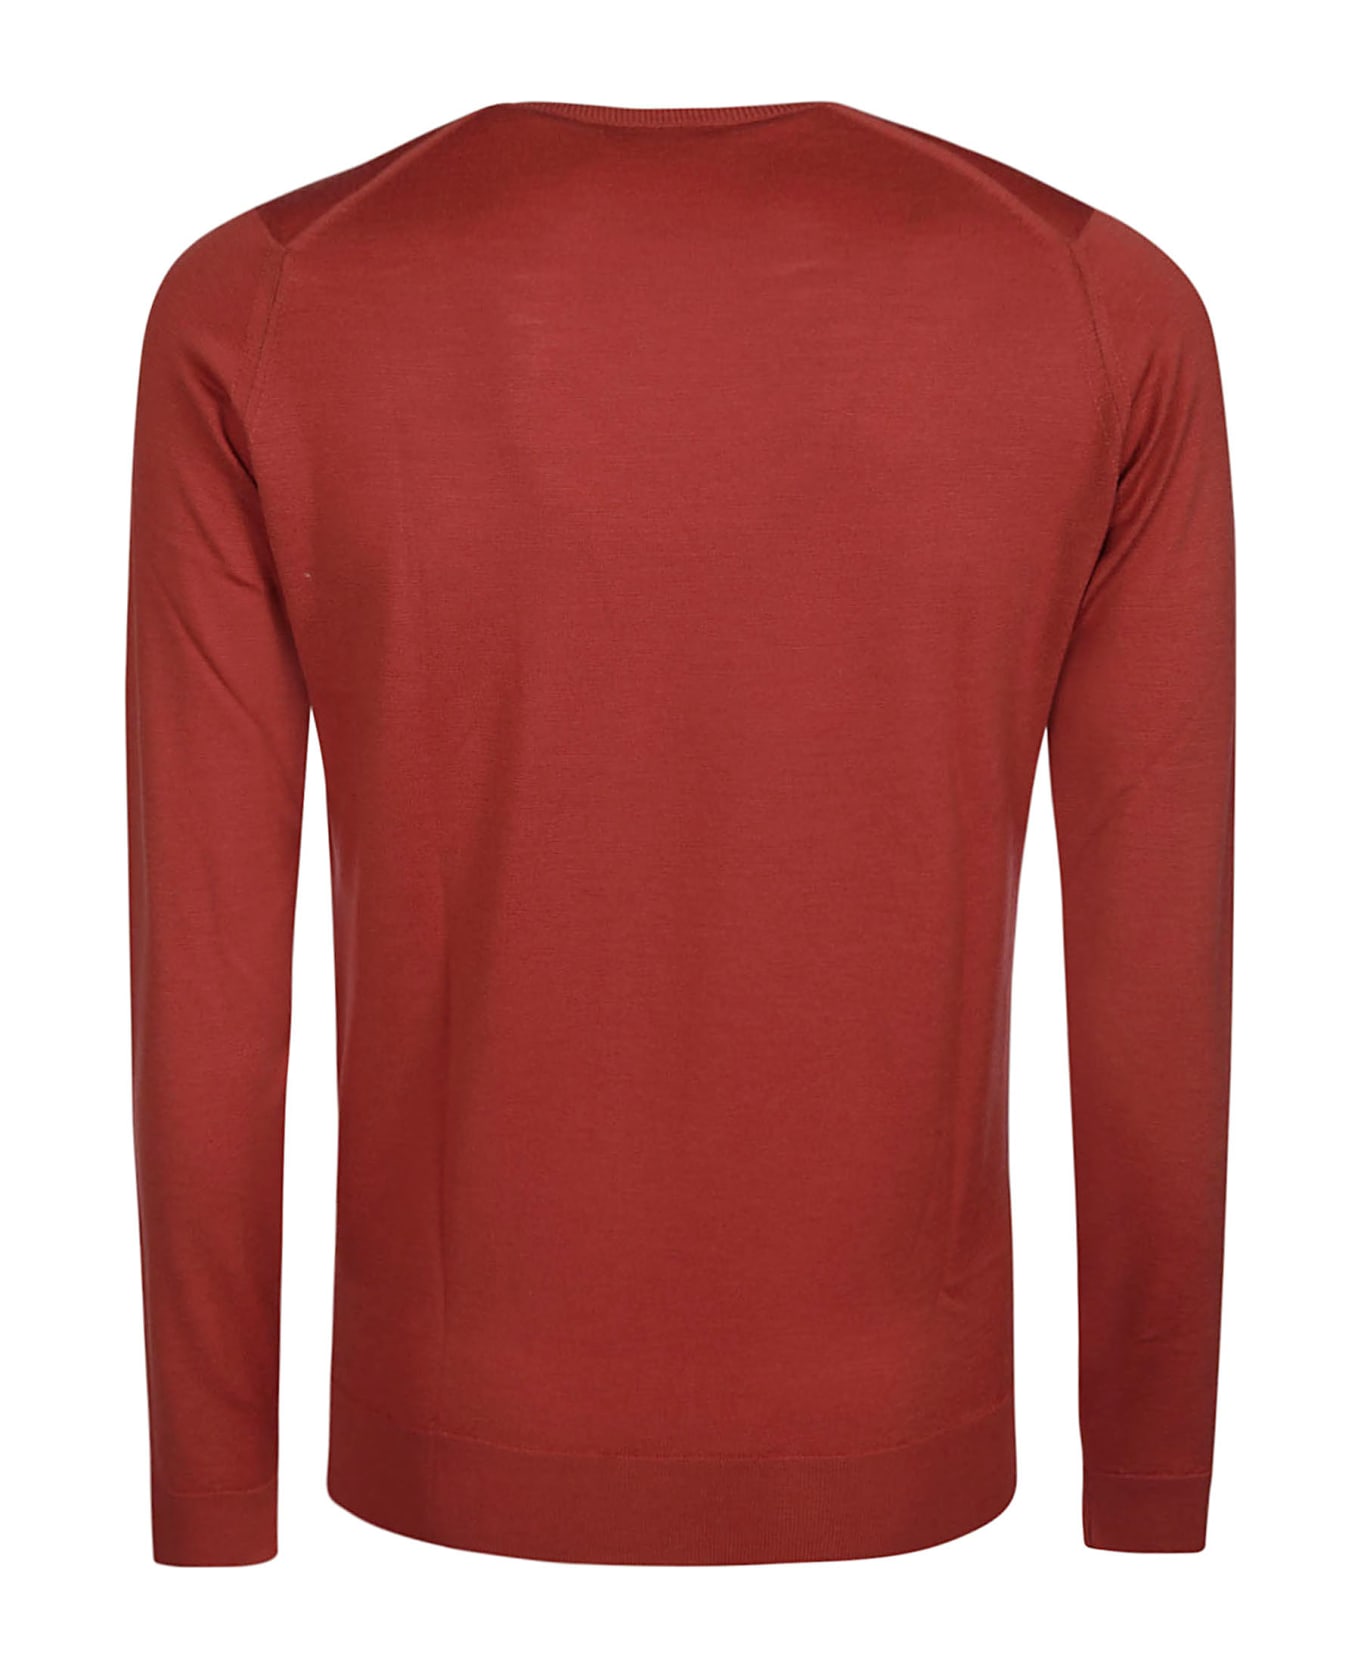 John Smedley Lundy Pullover Ls - Redwood